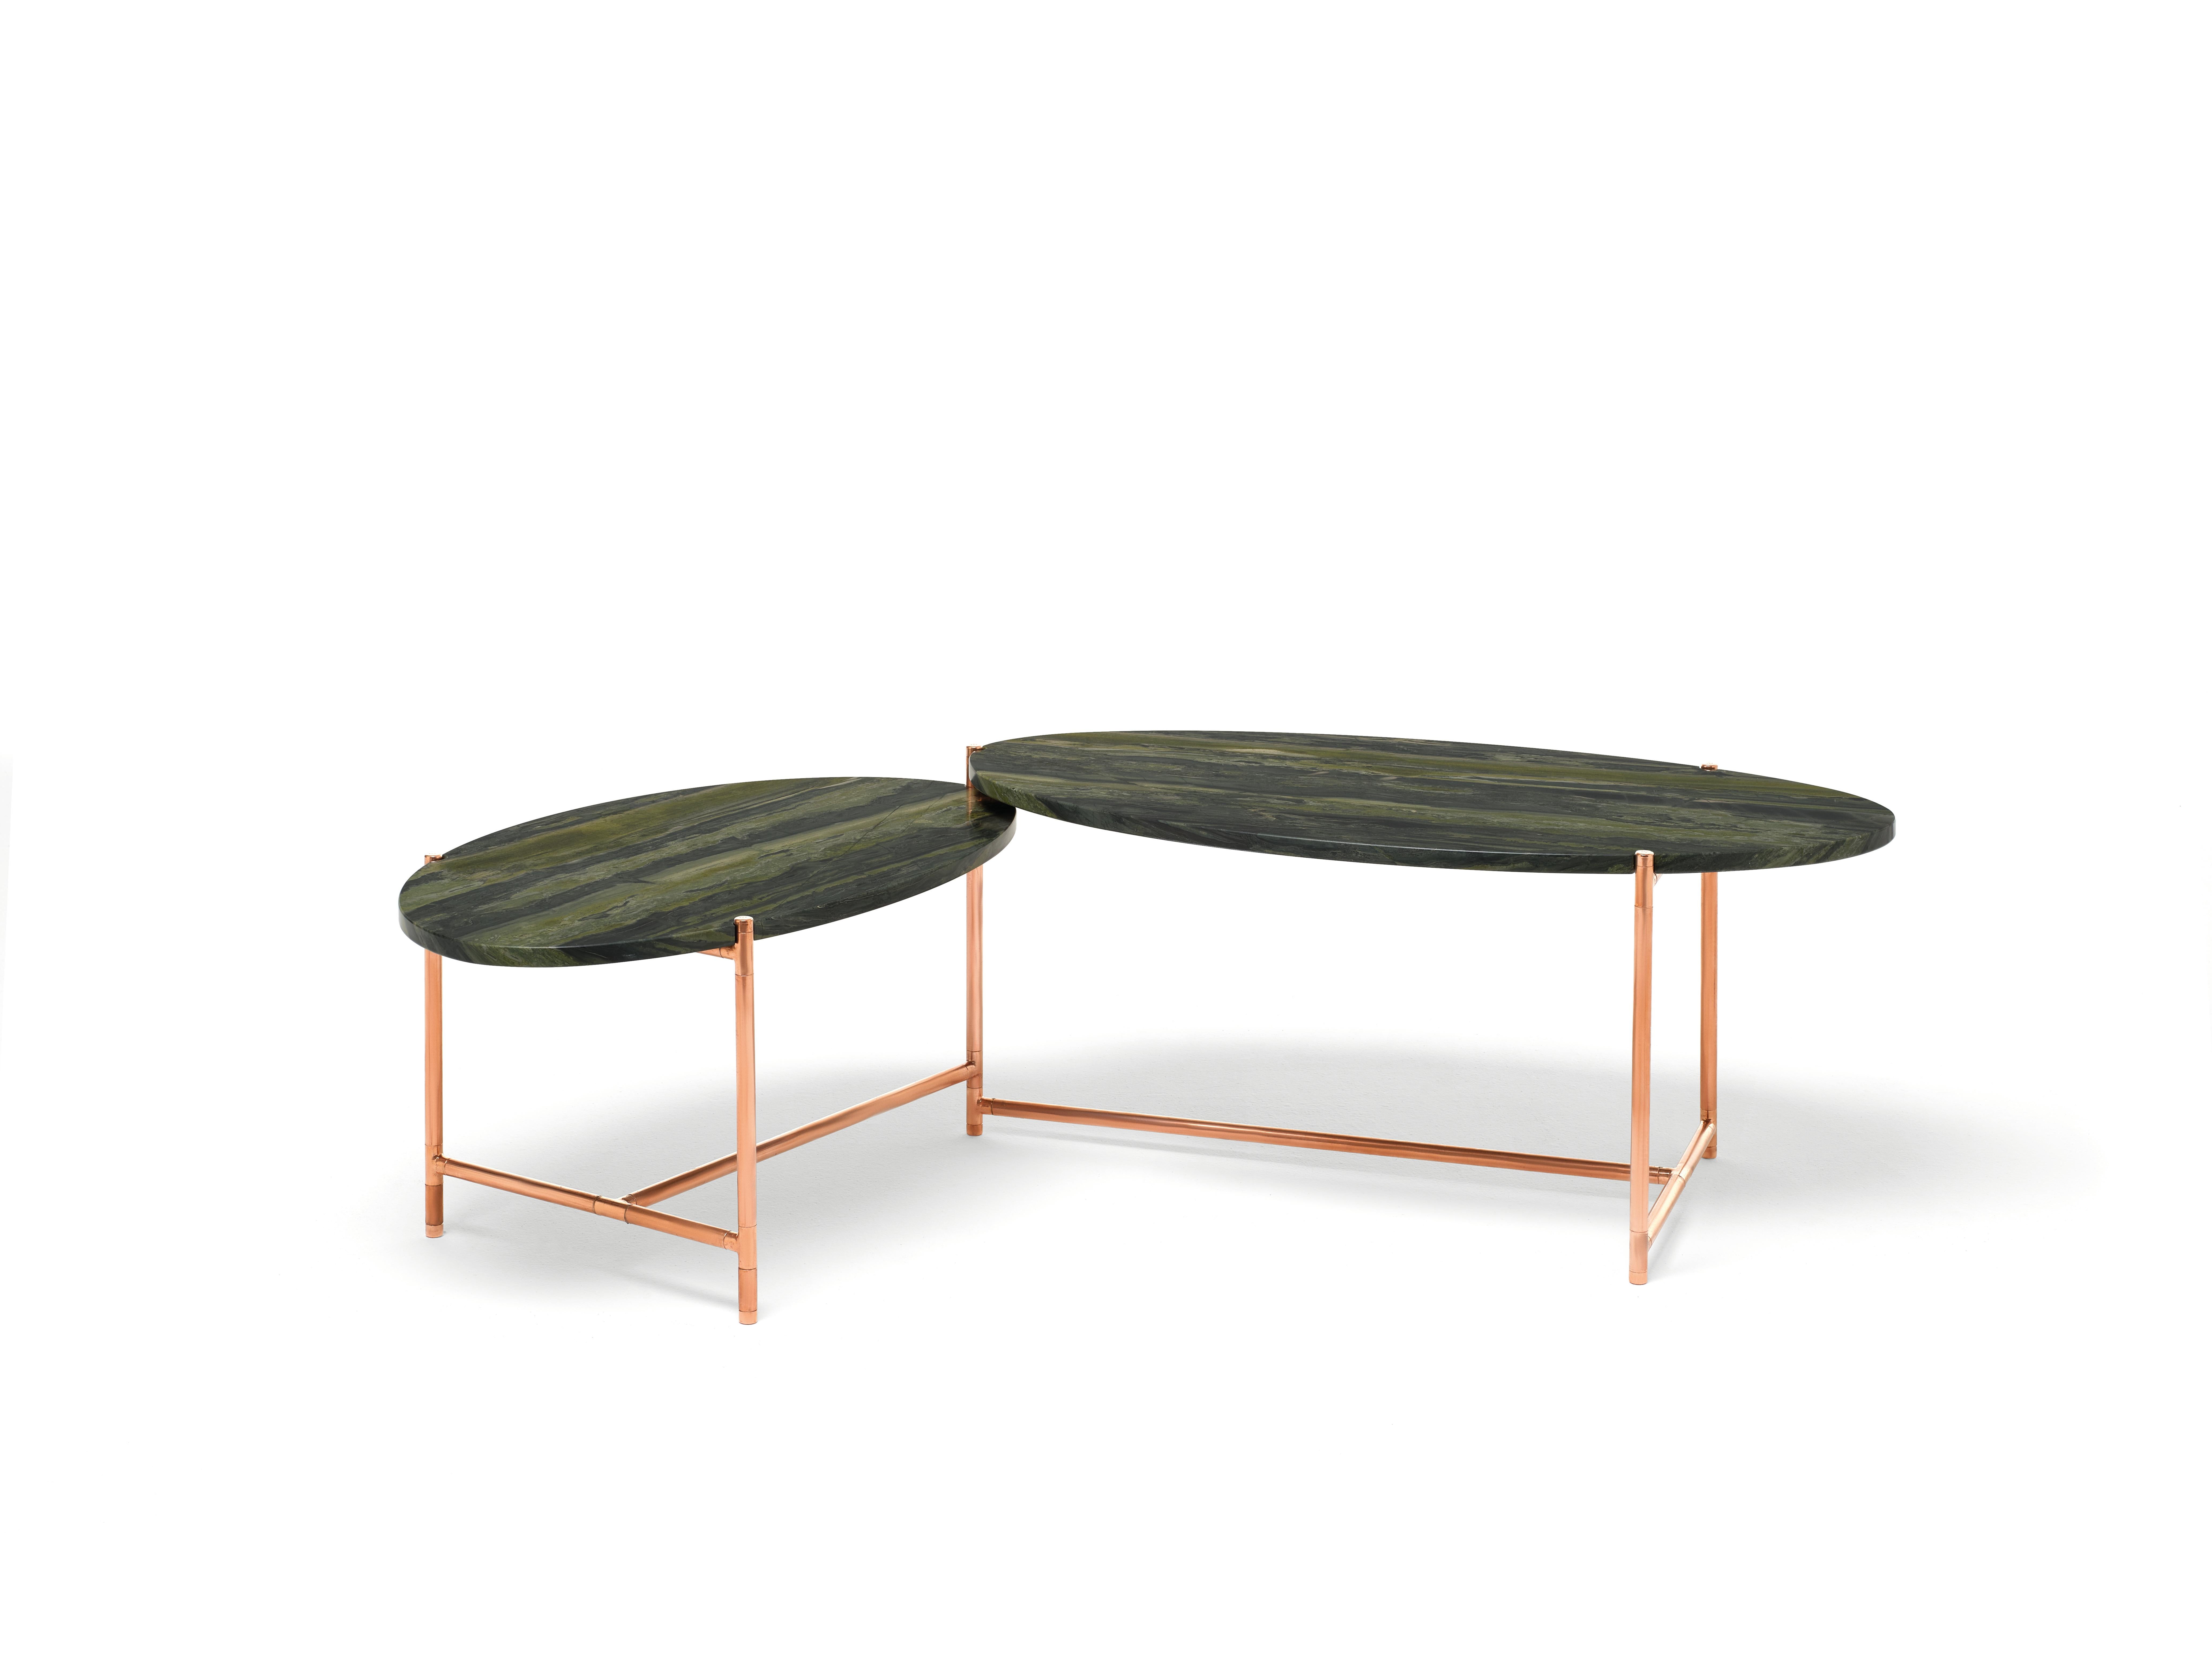 An original coffee table with two tops that can rotate around a central pivoting point, like the hands of a clock. This allows the table to expand and contract its usable surface and to adapt to different uses and spaces. The specular curves of the